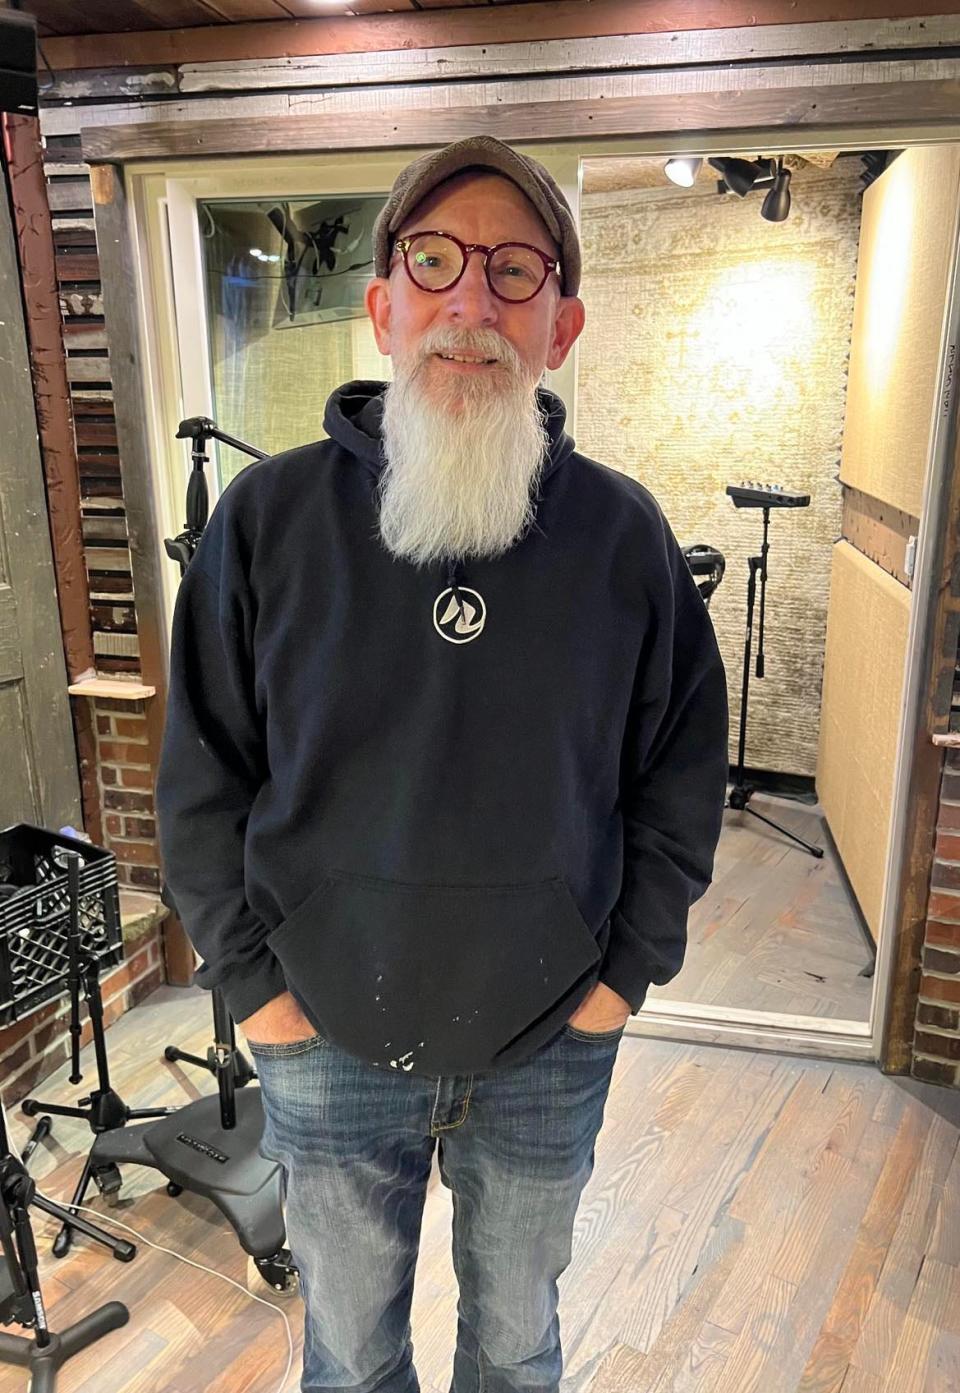 Ron Flack has seen his recording studio in Canton grow from inside his home to a stand-alone location. Realgrey Records, which includes Our Carriage House Recording Studio, works with Northeast Ohio musicians and bands.